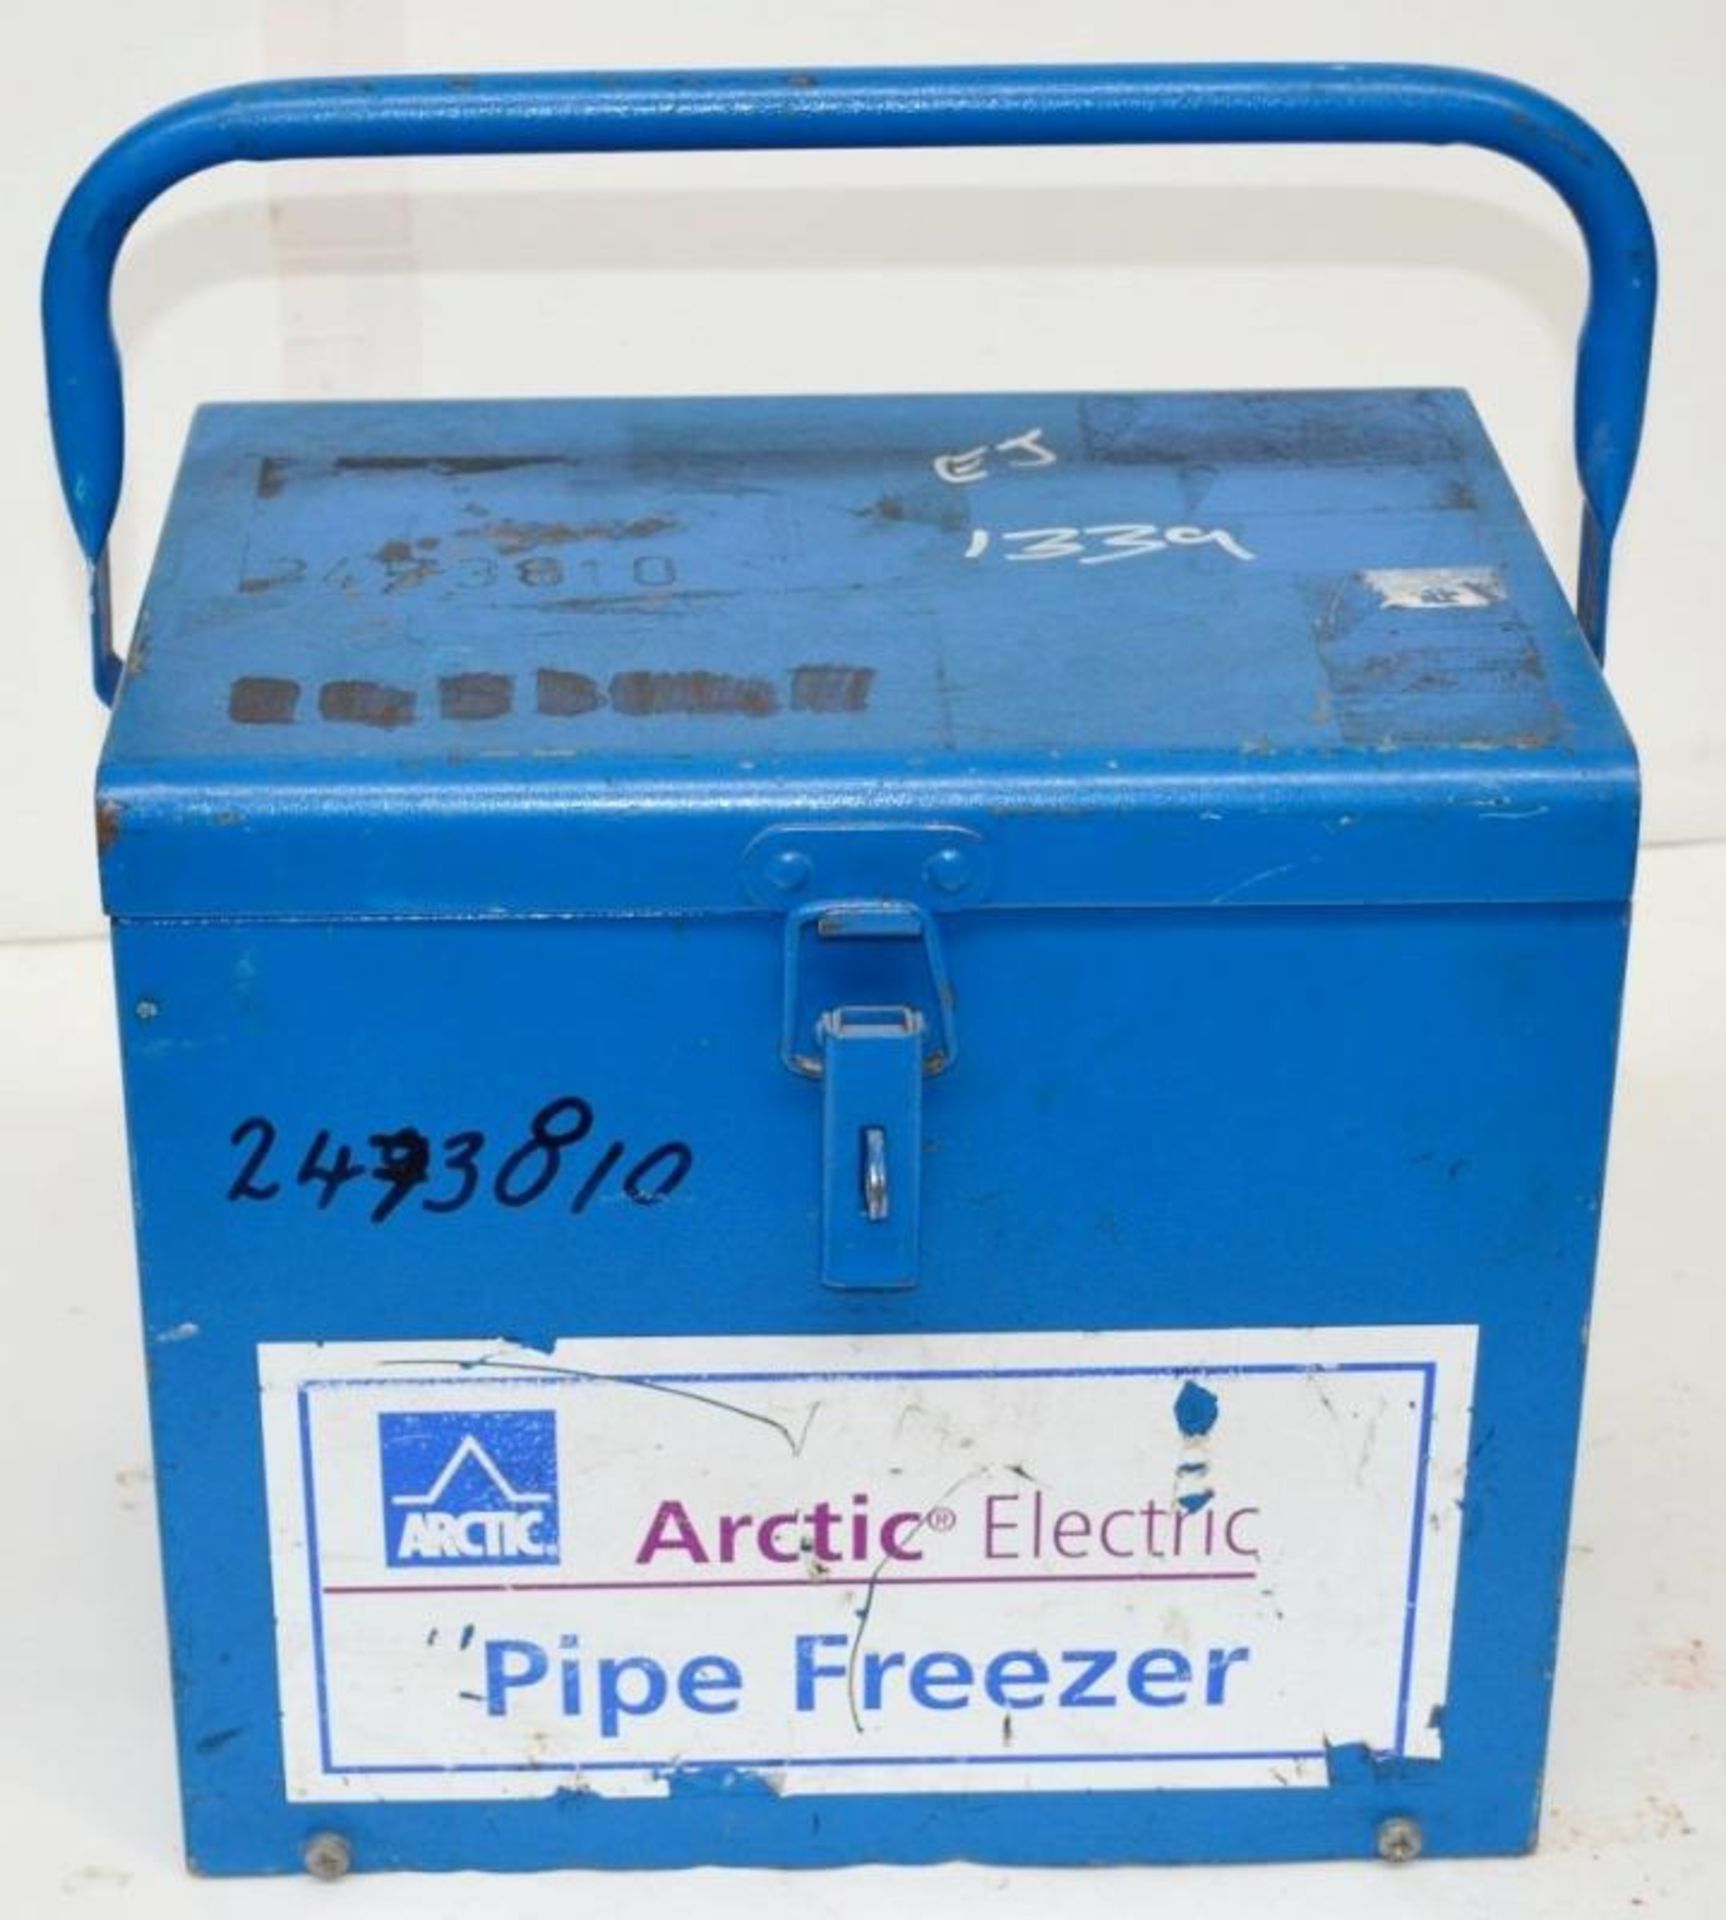 1 x Freeze Master Arctic Freeze Electric Pipe Freezer - UK Mains 220/240 volt - Used In Working